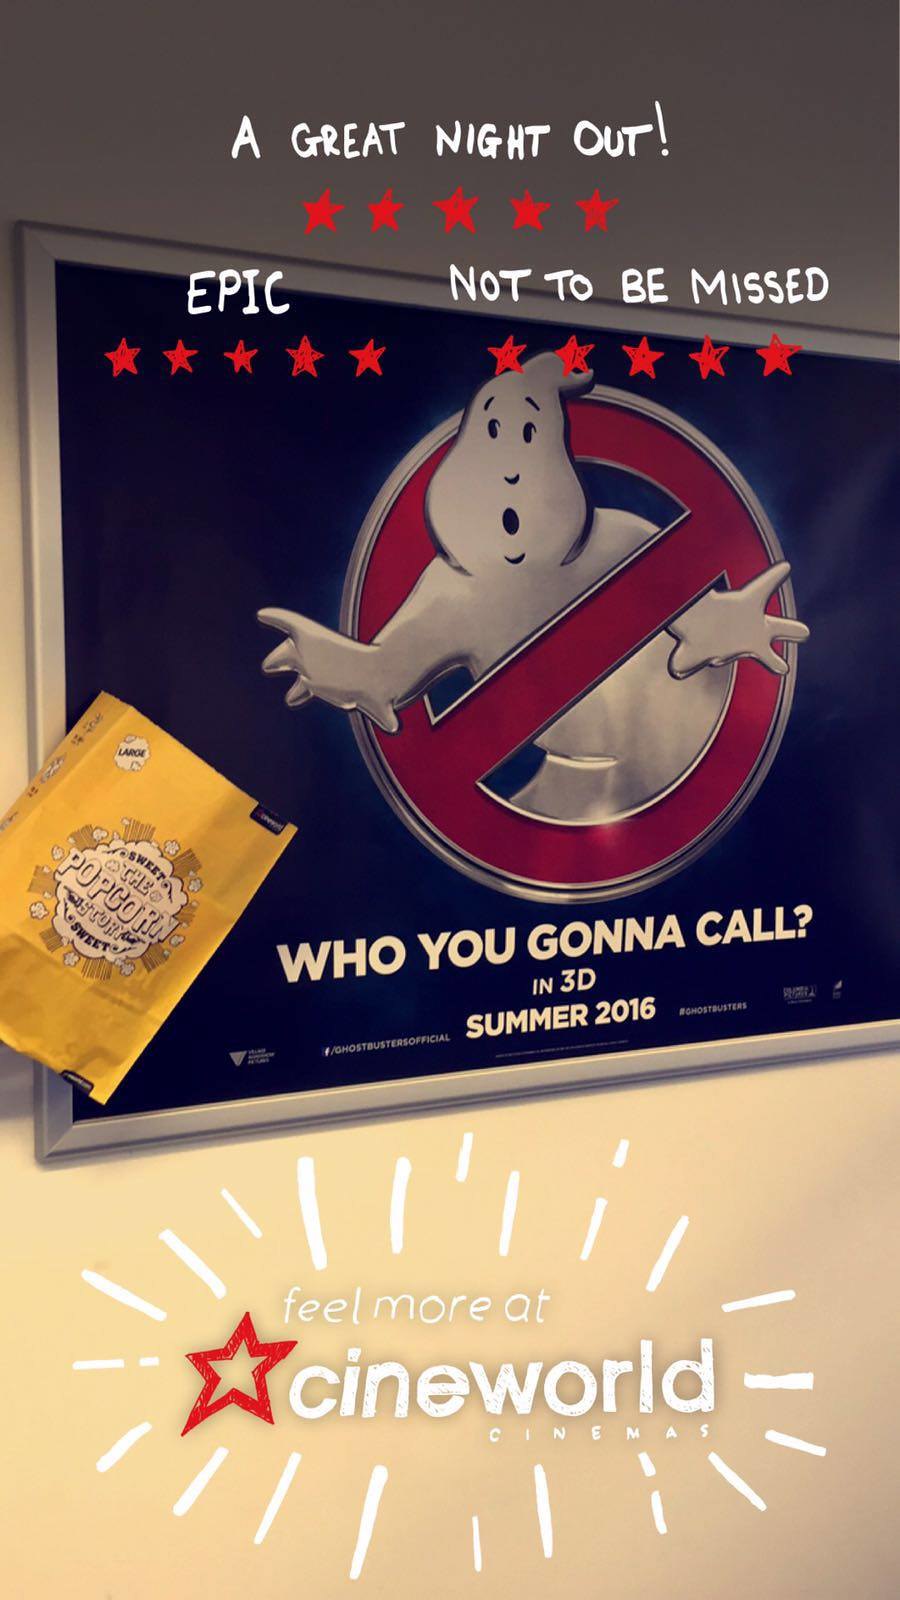 Snapchat ghostbusters